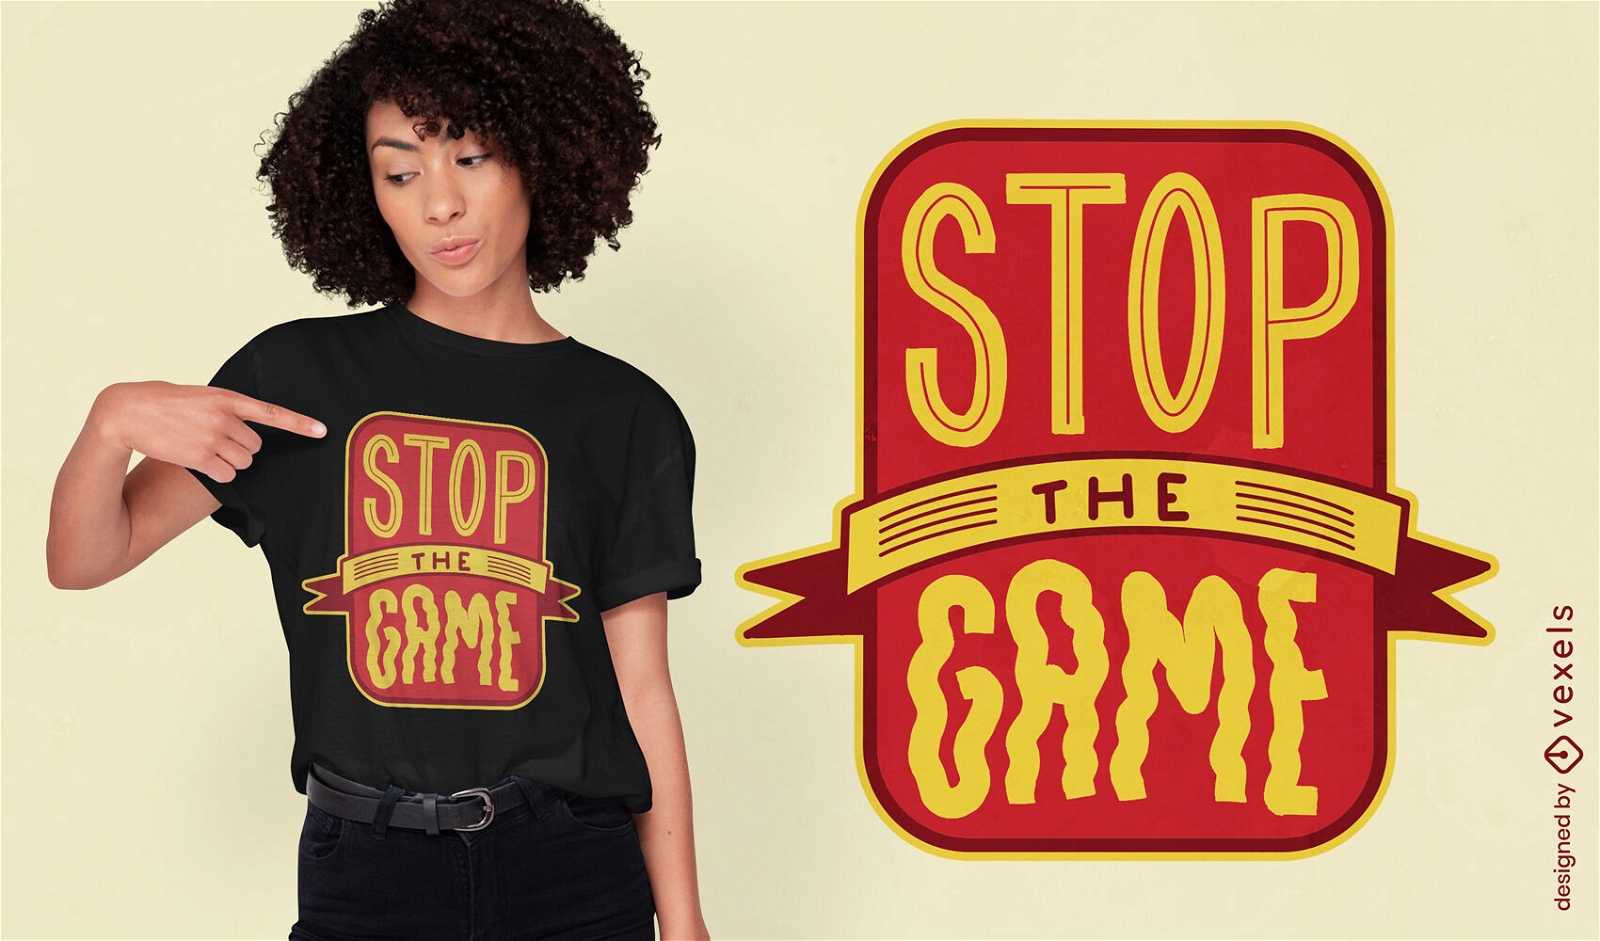 Stop the game t-shirt design